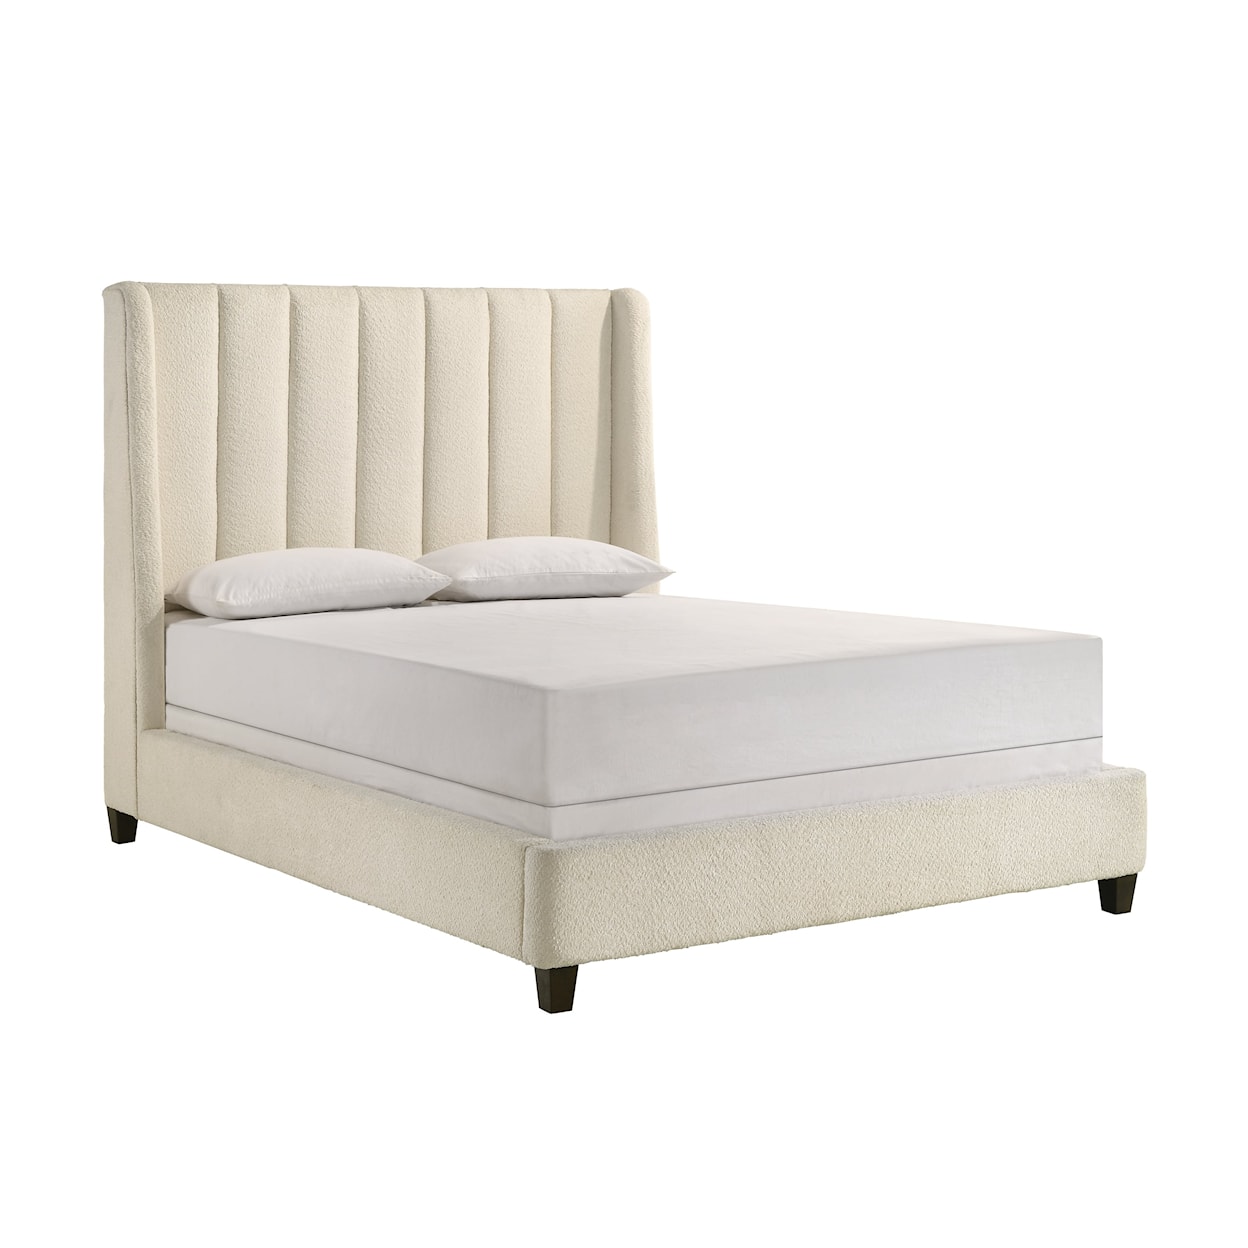 CM AGNES Queen Upholstered Bed